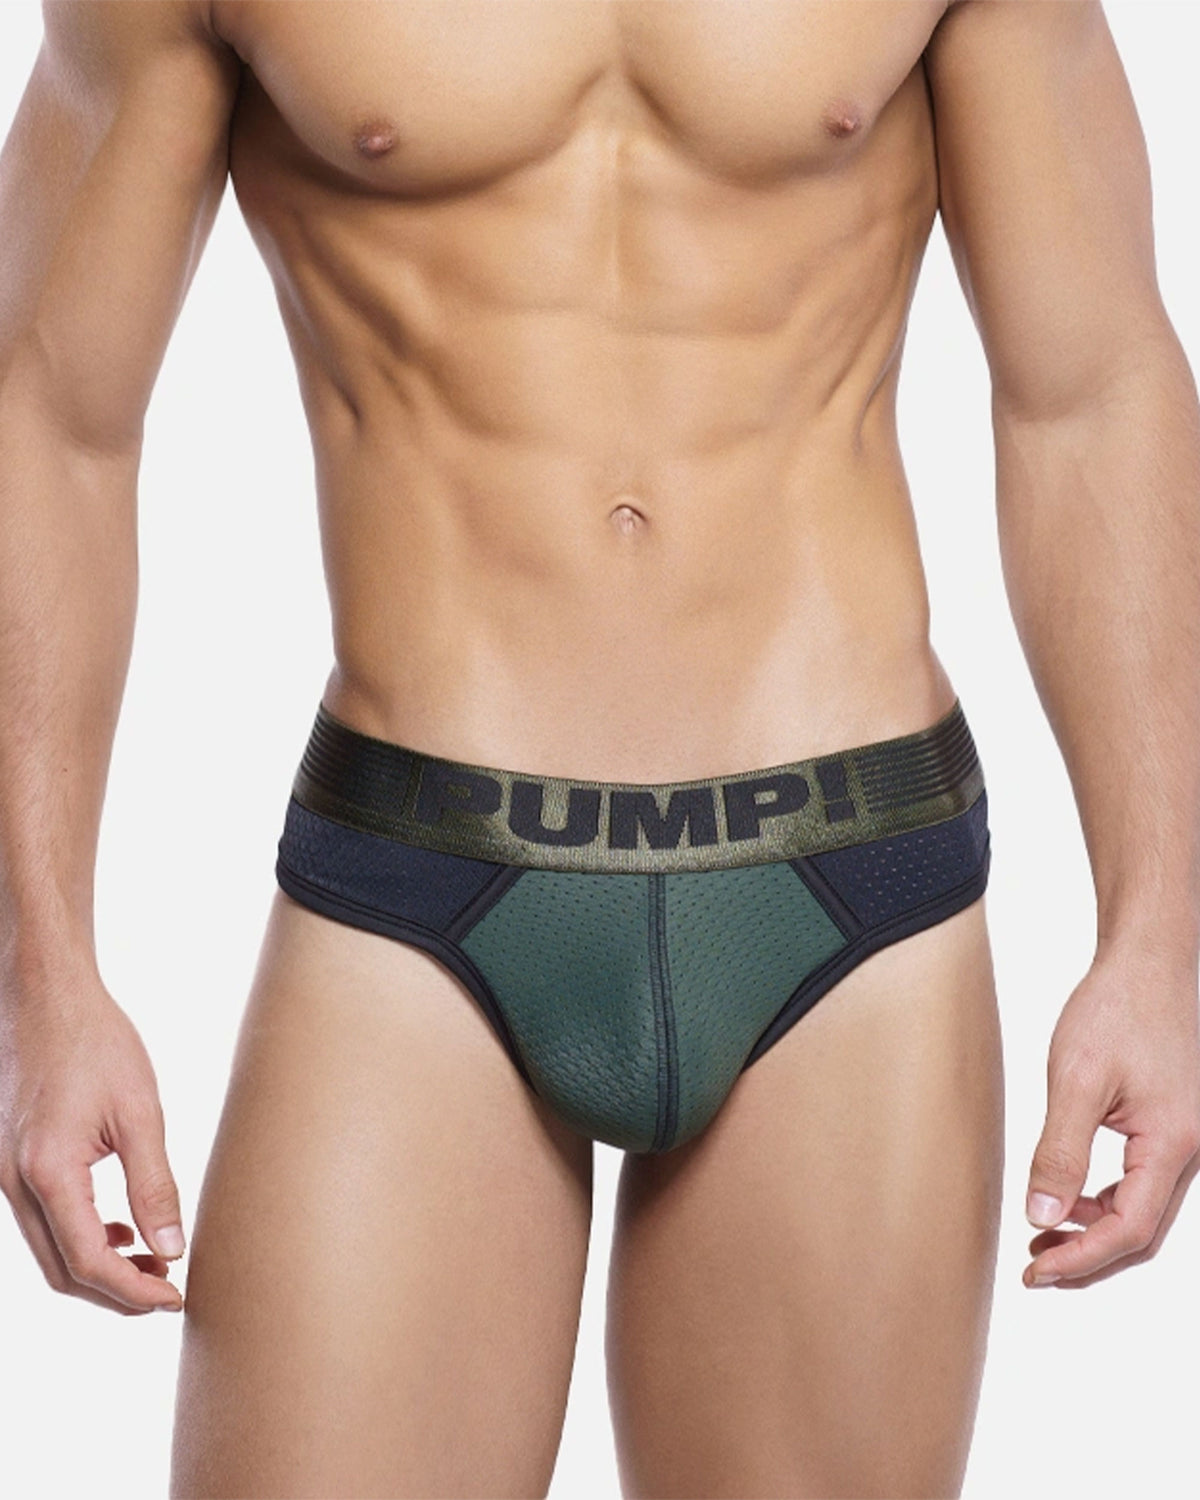 PUMP! Underwear • Official UK Stockist for Over a Decade